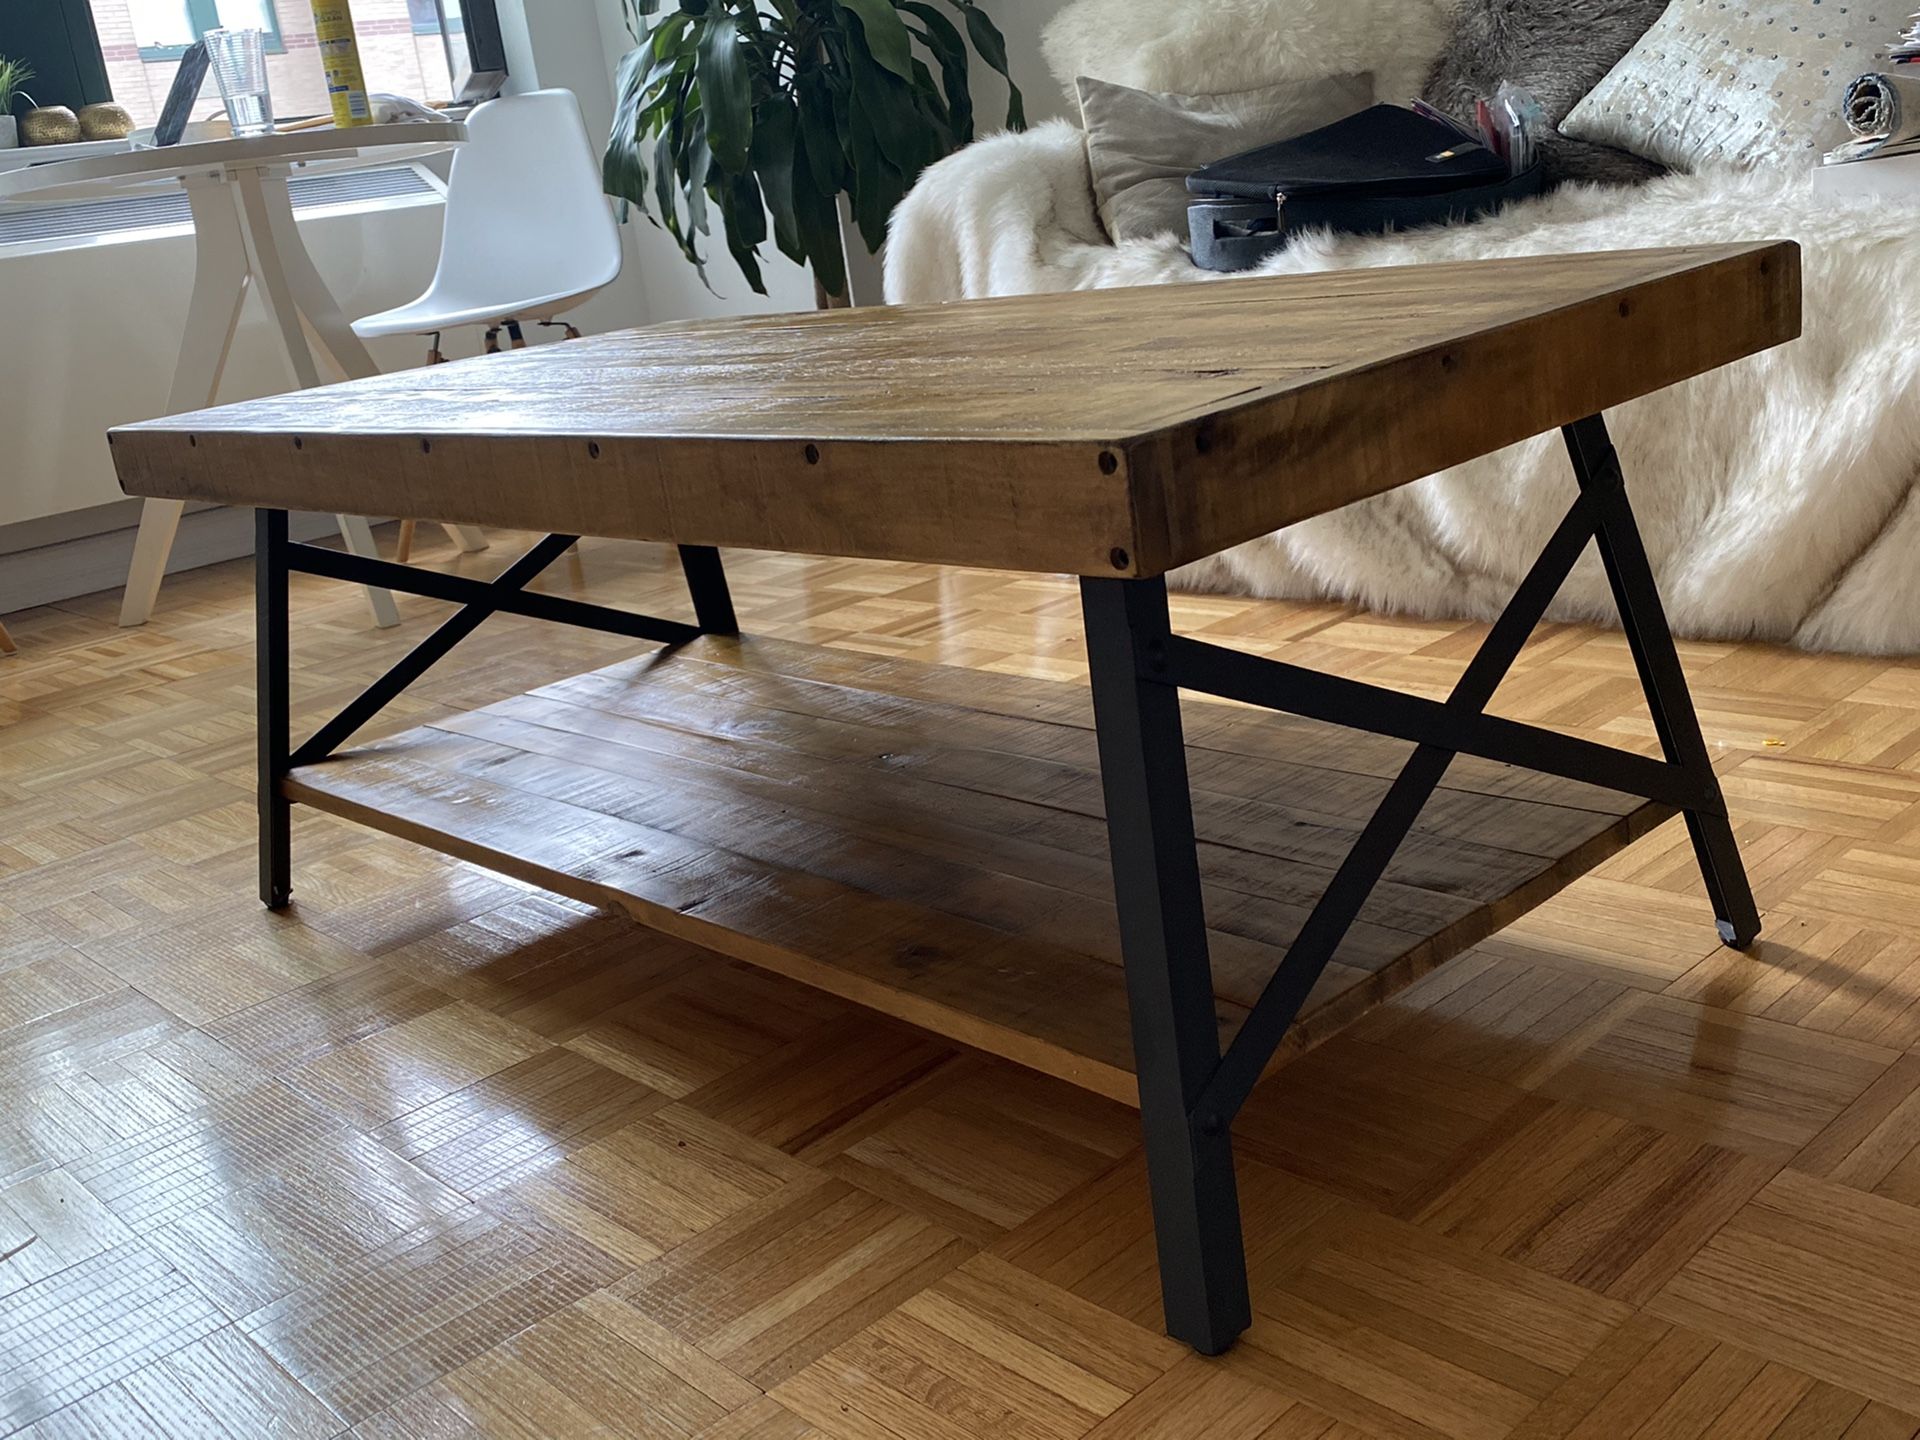 Wood coffee table industrial style with iron sides